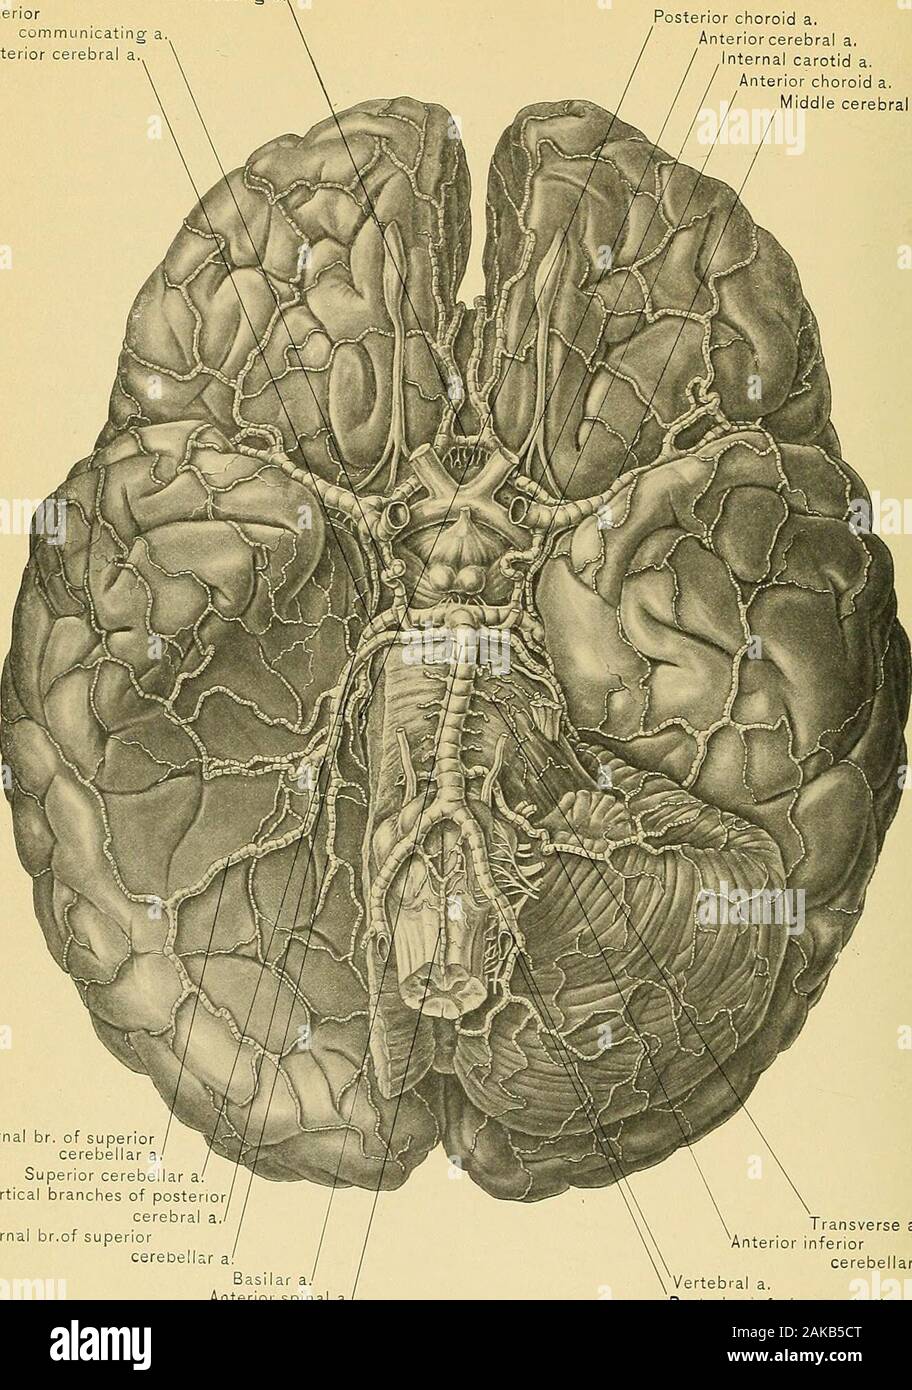 Surgical anatomy : a treatise on human anatomy in its application to the practice of medicine and surgery . the meatus, passes intothe internal ear. The Anterior Inferior Cerebellar Arteries, one on each side, arise from thebasilar artery near its middle. Each artery passes outward and backward overthe pons and the middle cms of the cerebellum. It terminates at the fore partof the under surface of the hemisphere of the cerebellum, to which it is dis-tributed. It anastomoses with the posterior inferior cerebellar artery. The Superior Cerebellar Arteries, one on each side, arise from the basilar Stock Photo